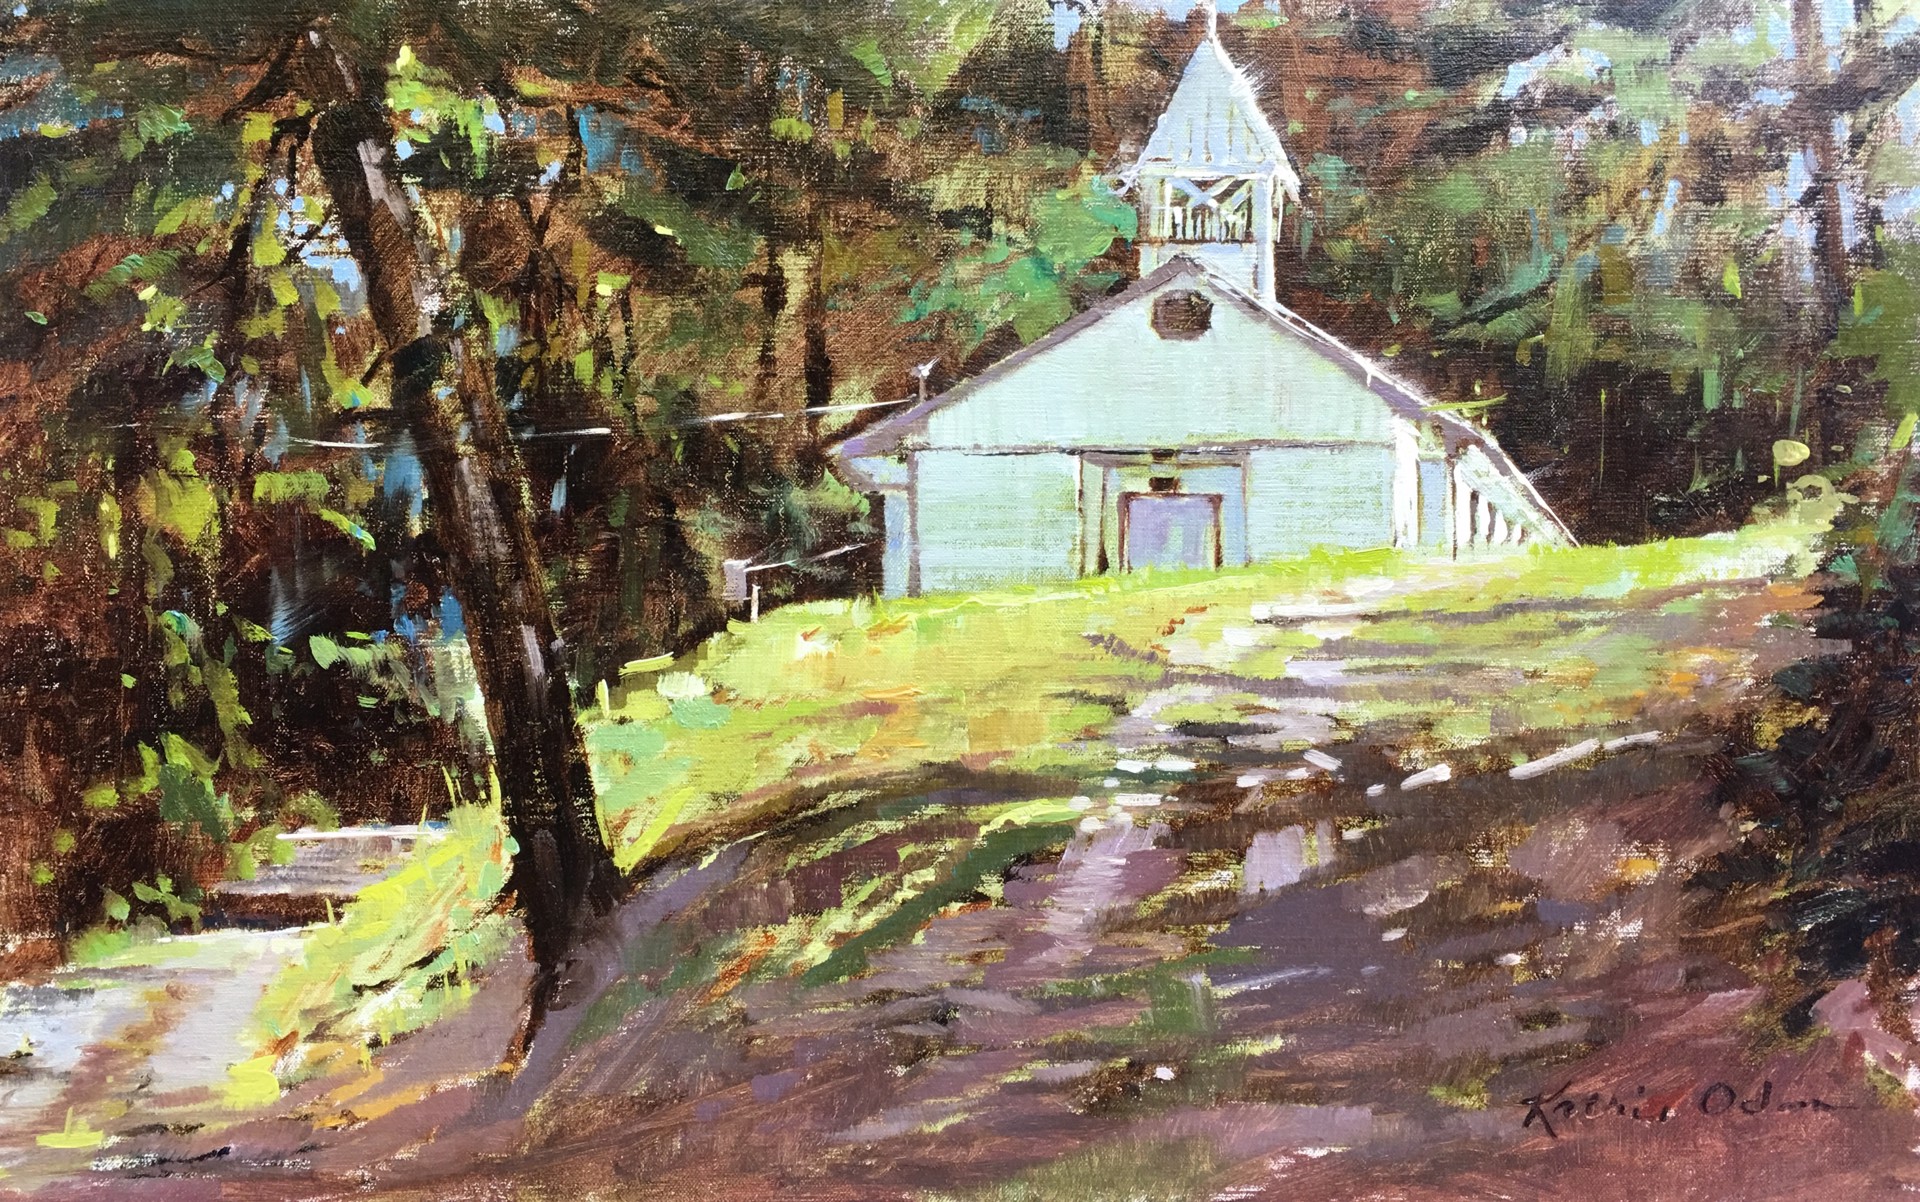 Going to the Chapel by Kathie Odom